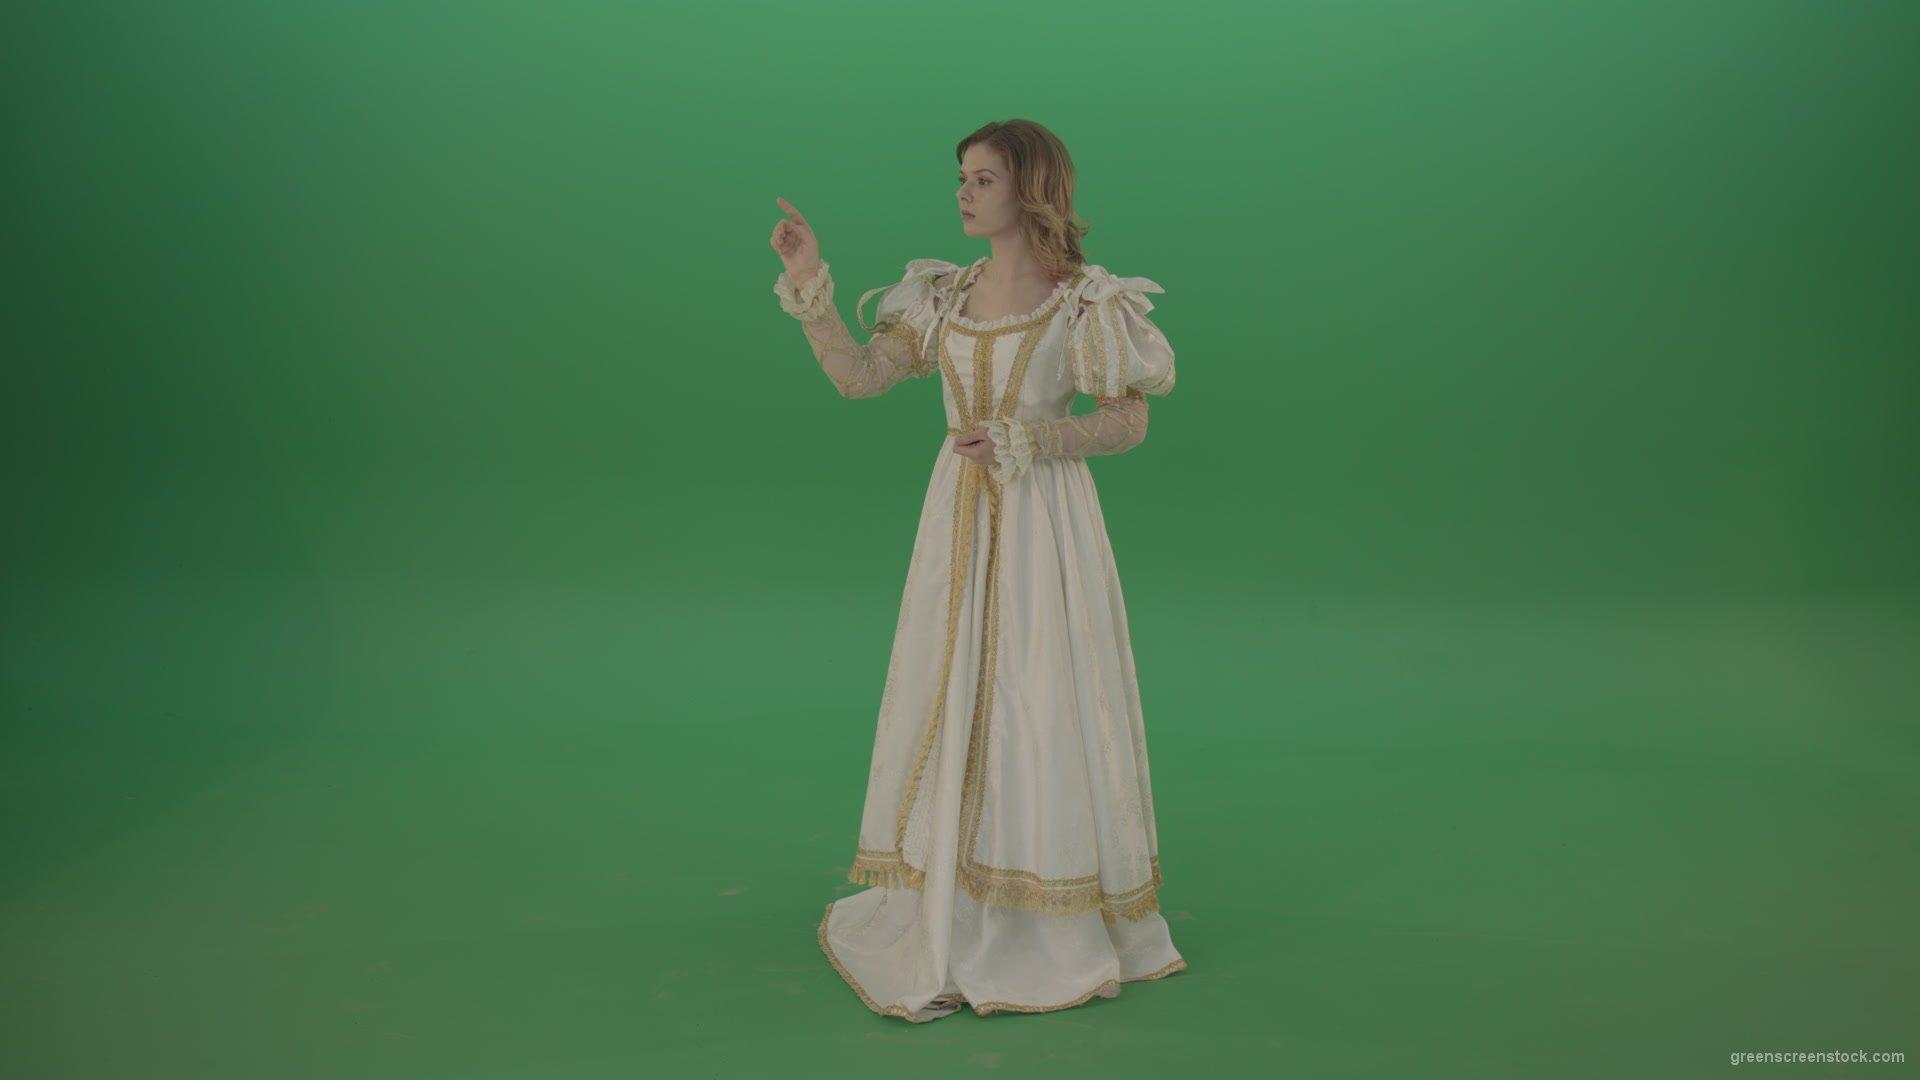 Flips-the-touchscreen-princess-in-a-white-dress-isolated-on-green-screen_004 Green Screen Stock